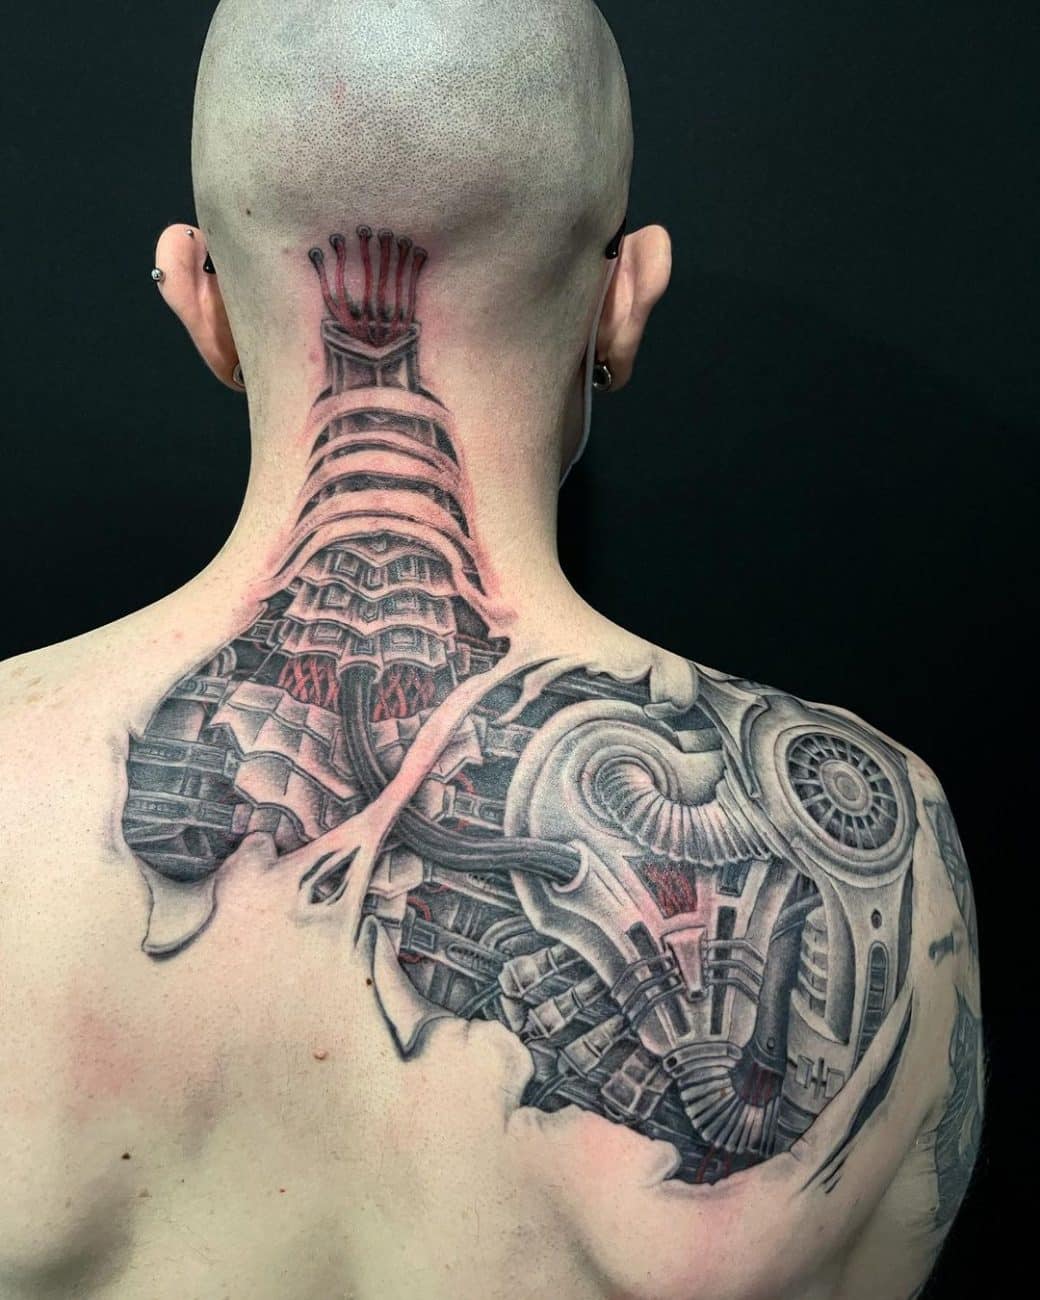 Biomechanical Tattoo Guide with tons of examples